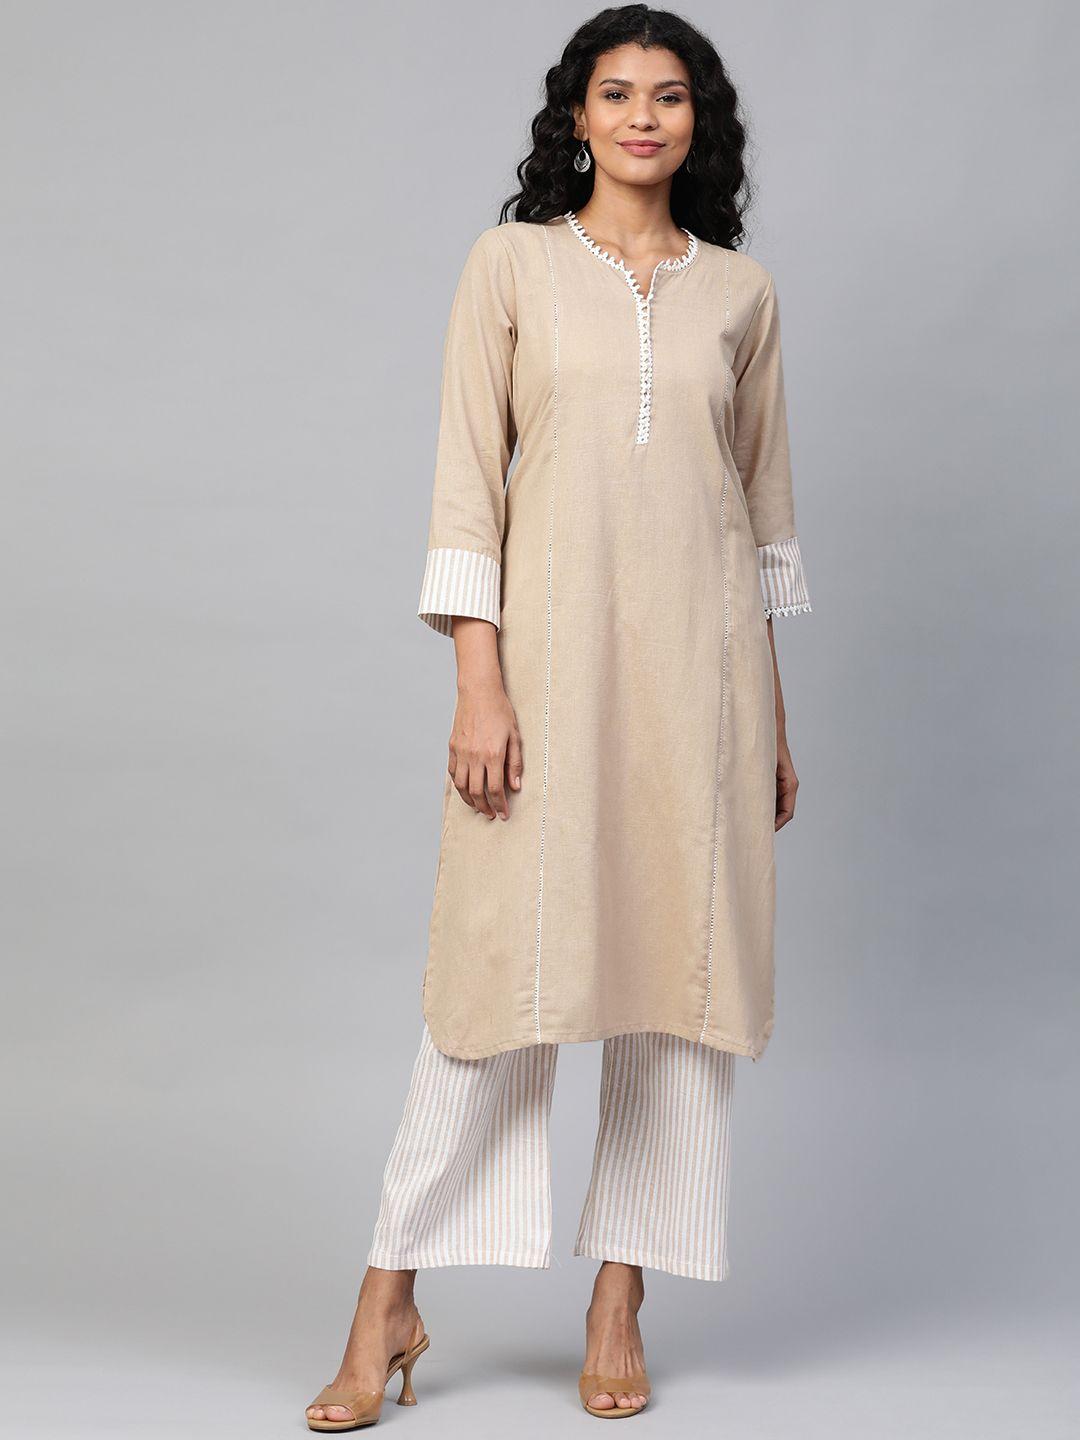 laado - pamper yourself women beige & off-white solid kurta with sustainable palazzos